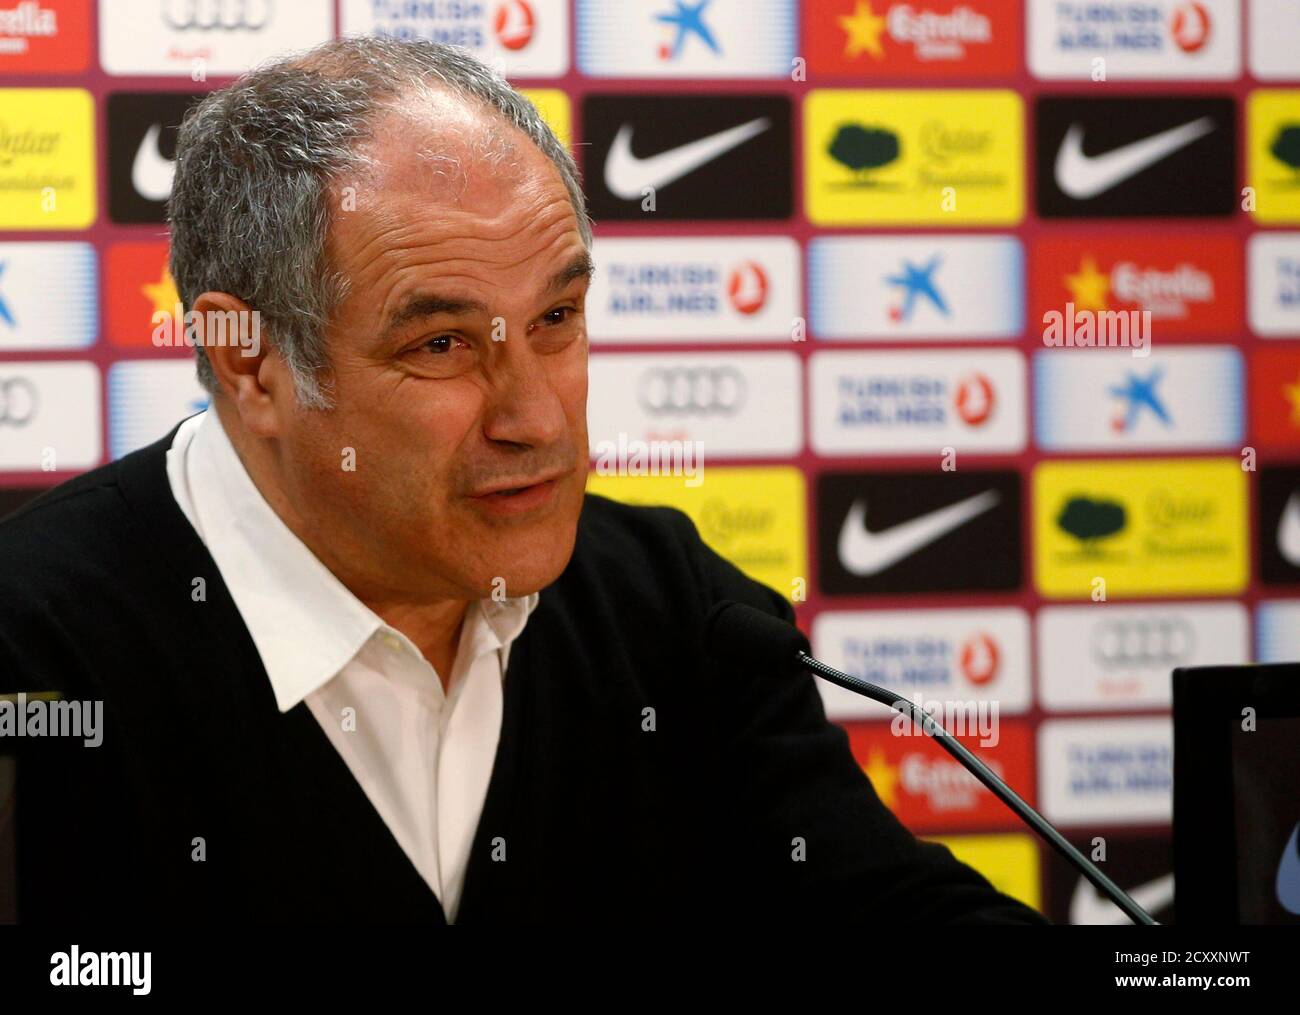 Barcelona's sports director Andoni Zubizarreta speaks during a news conference after the club announced that coach Tito Vilanova's saliva glandular cancer had reappeared, at Ciutat Esportiva in Sant Joan Despi near Barcelona December 19, 2012. La Liga leaders Barcelona have been rocked by news Vilanova is to have surgery on his saliva glands on Thursday, followed by chemotherapy and radiotherapy over the following six weeks.    REUTERS/Gustau Nacarino(SPAIN - Tags: SPORT SOCCER) Stock Photo